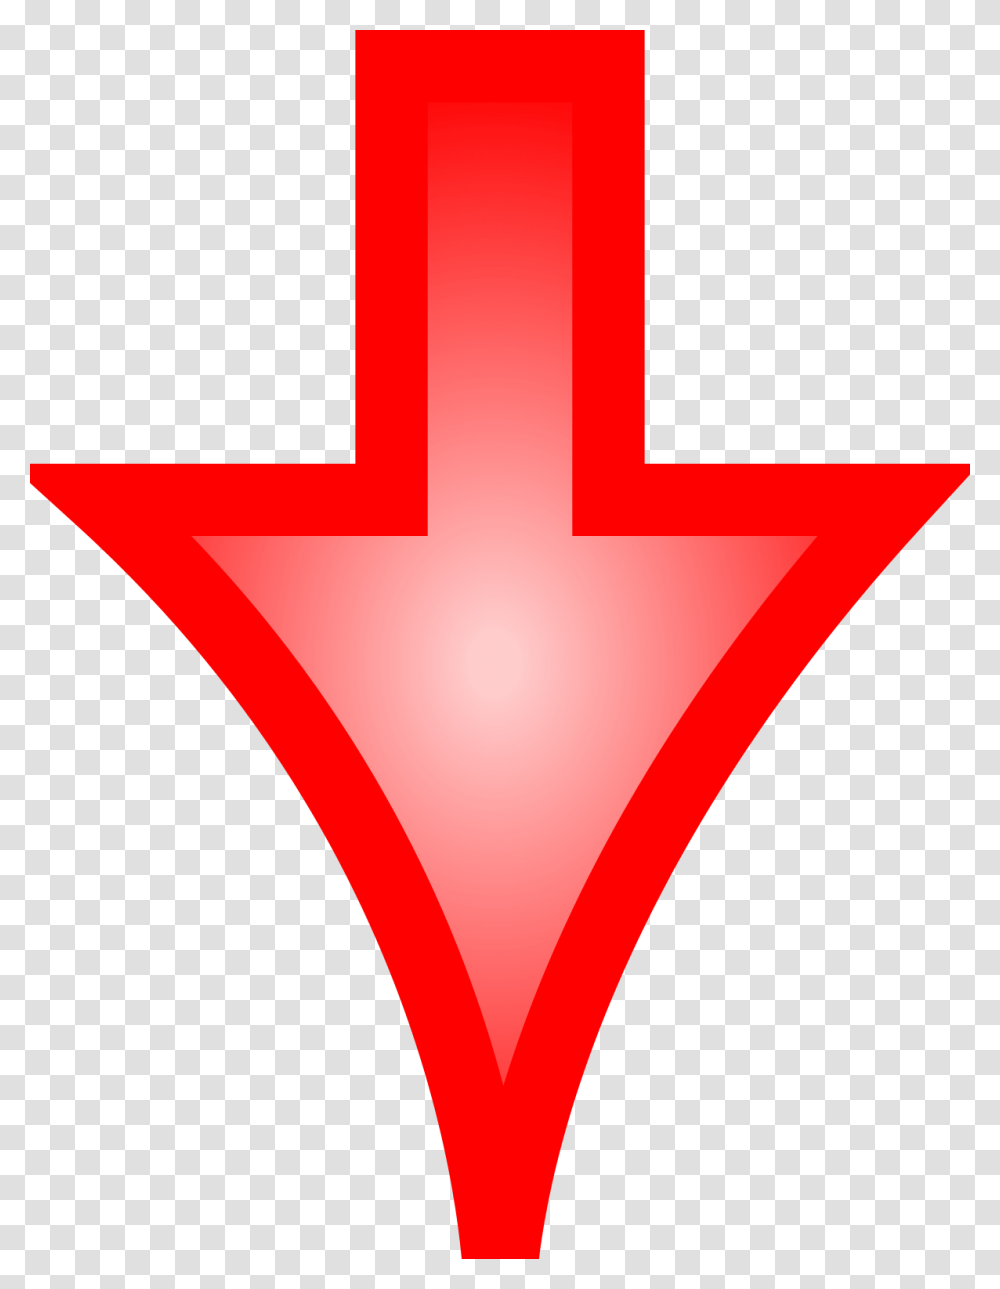 Red Arrow, Triangle, Heart, Star Symbol Transparent Png